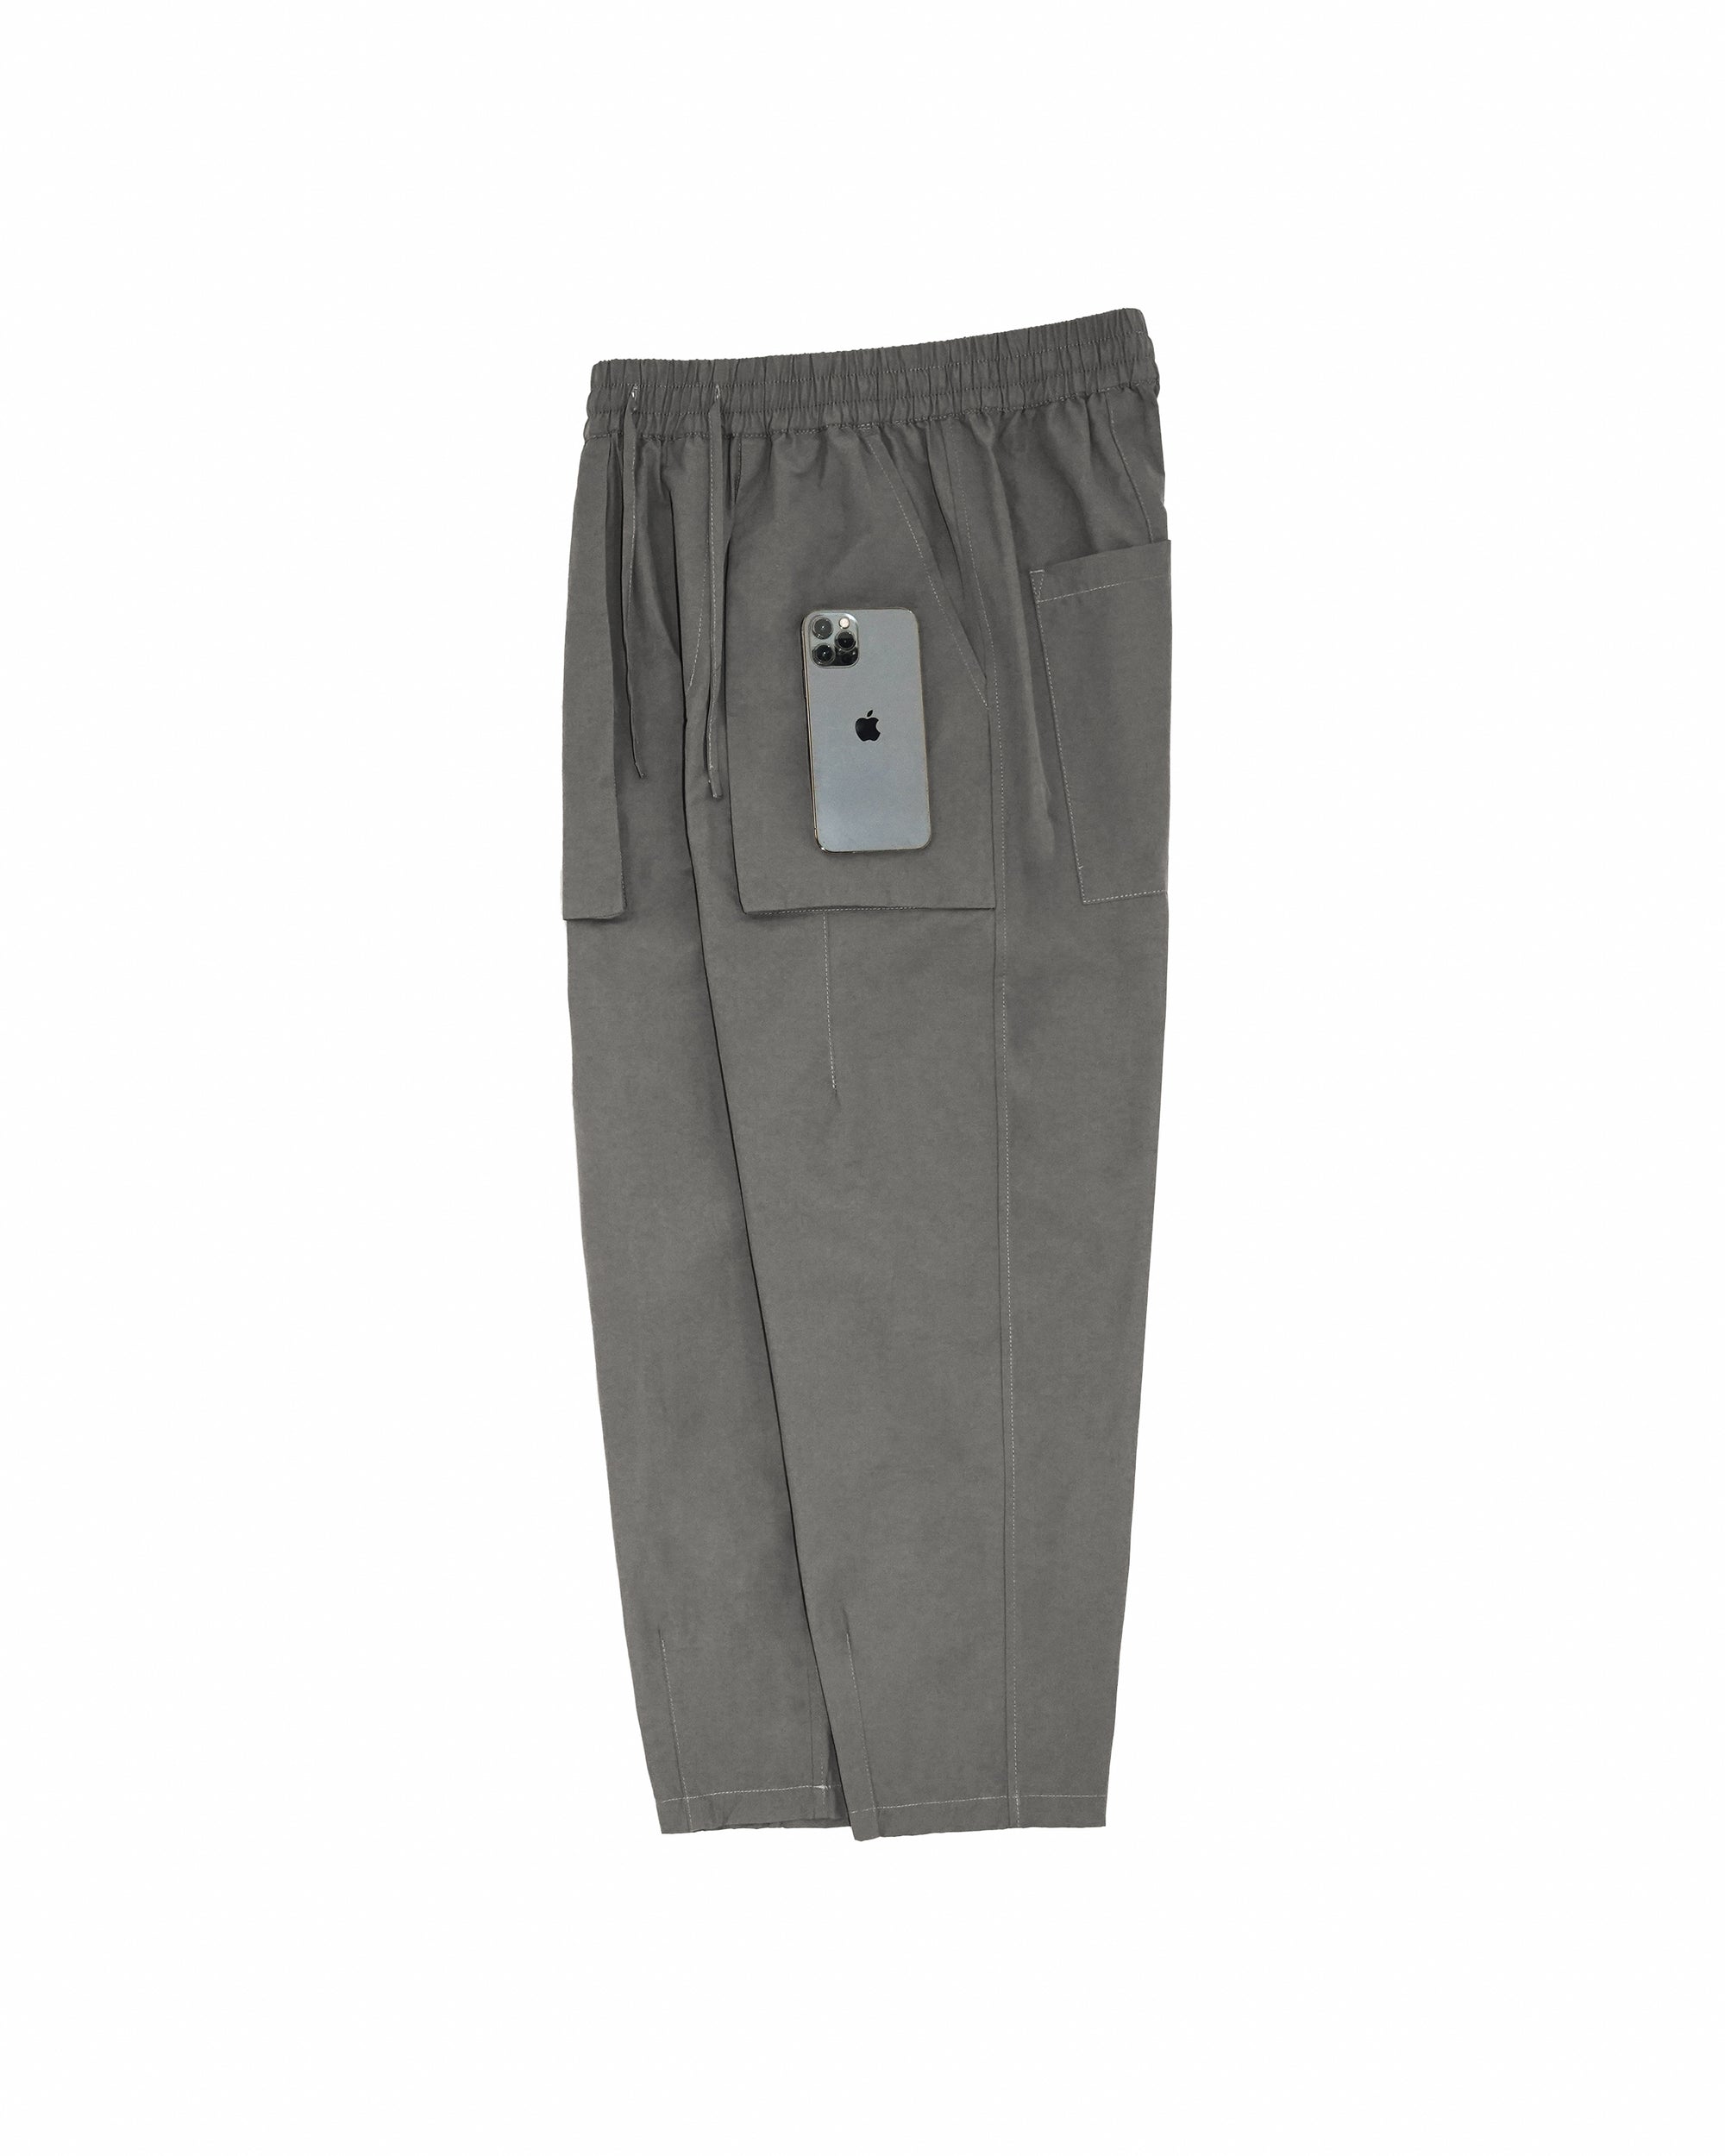 Relaxed Elasticated Trousers - Pebble Gray